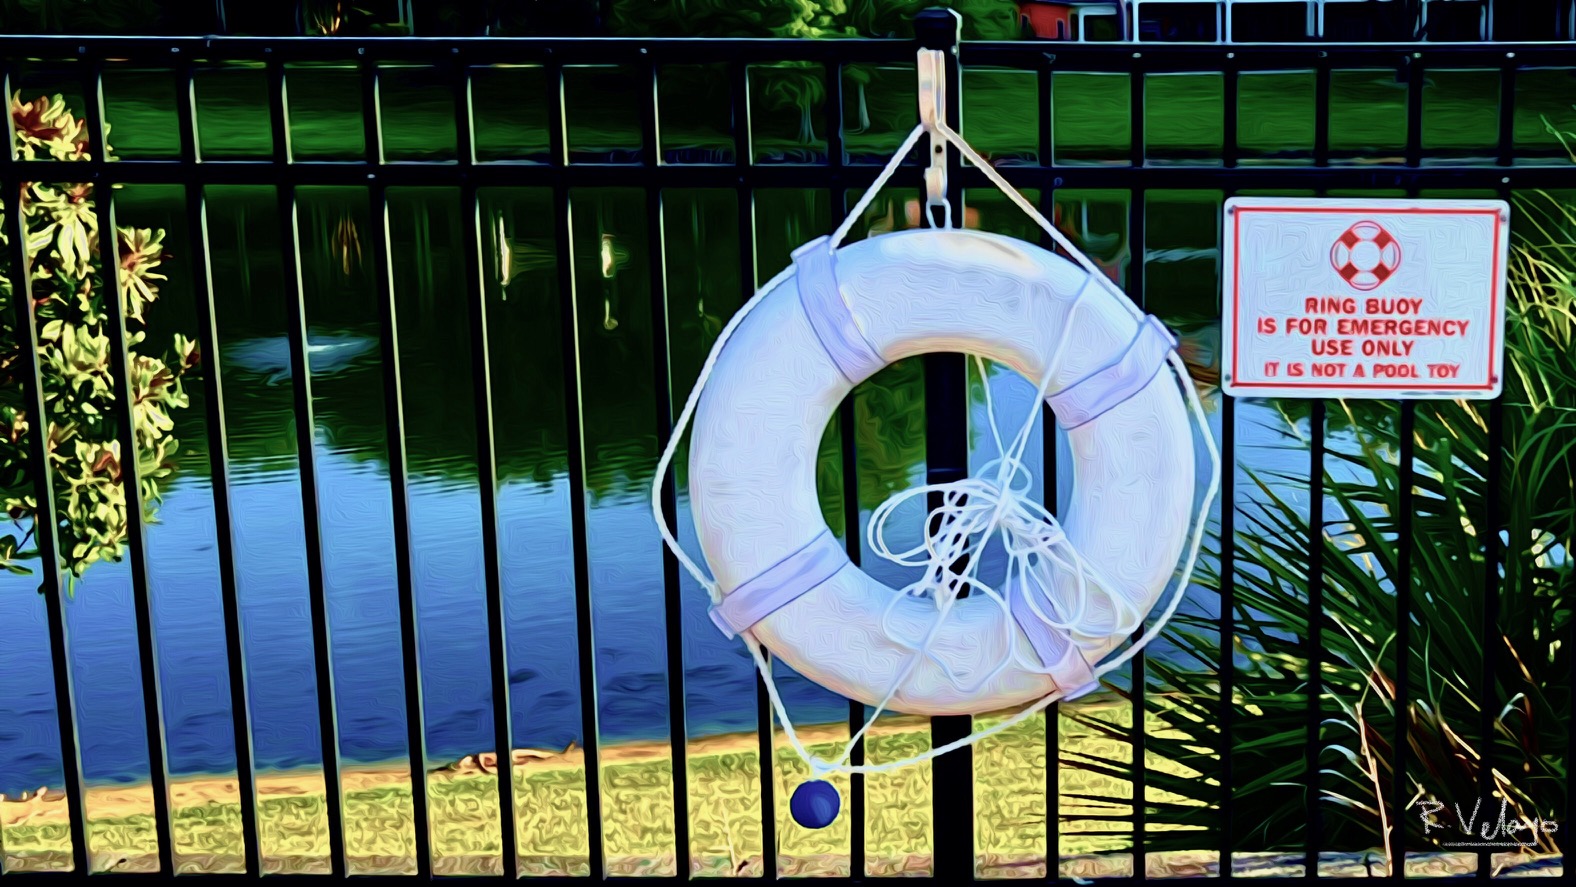 "LIFESAVER BY THE CLUBHOUSE POOL" [4/29/2022]